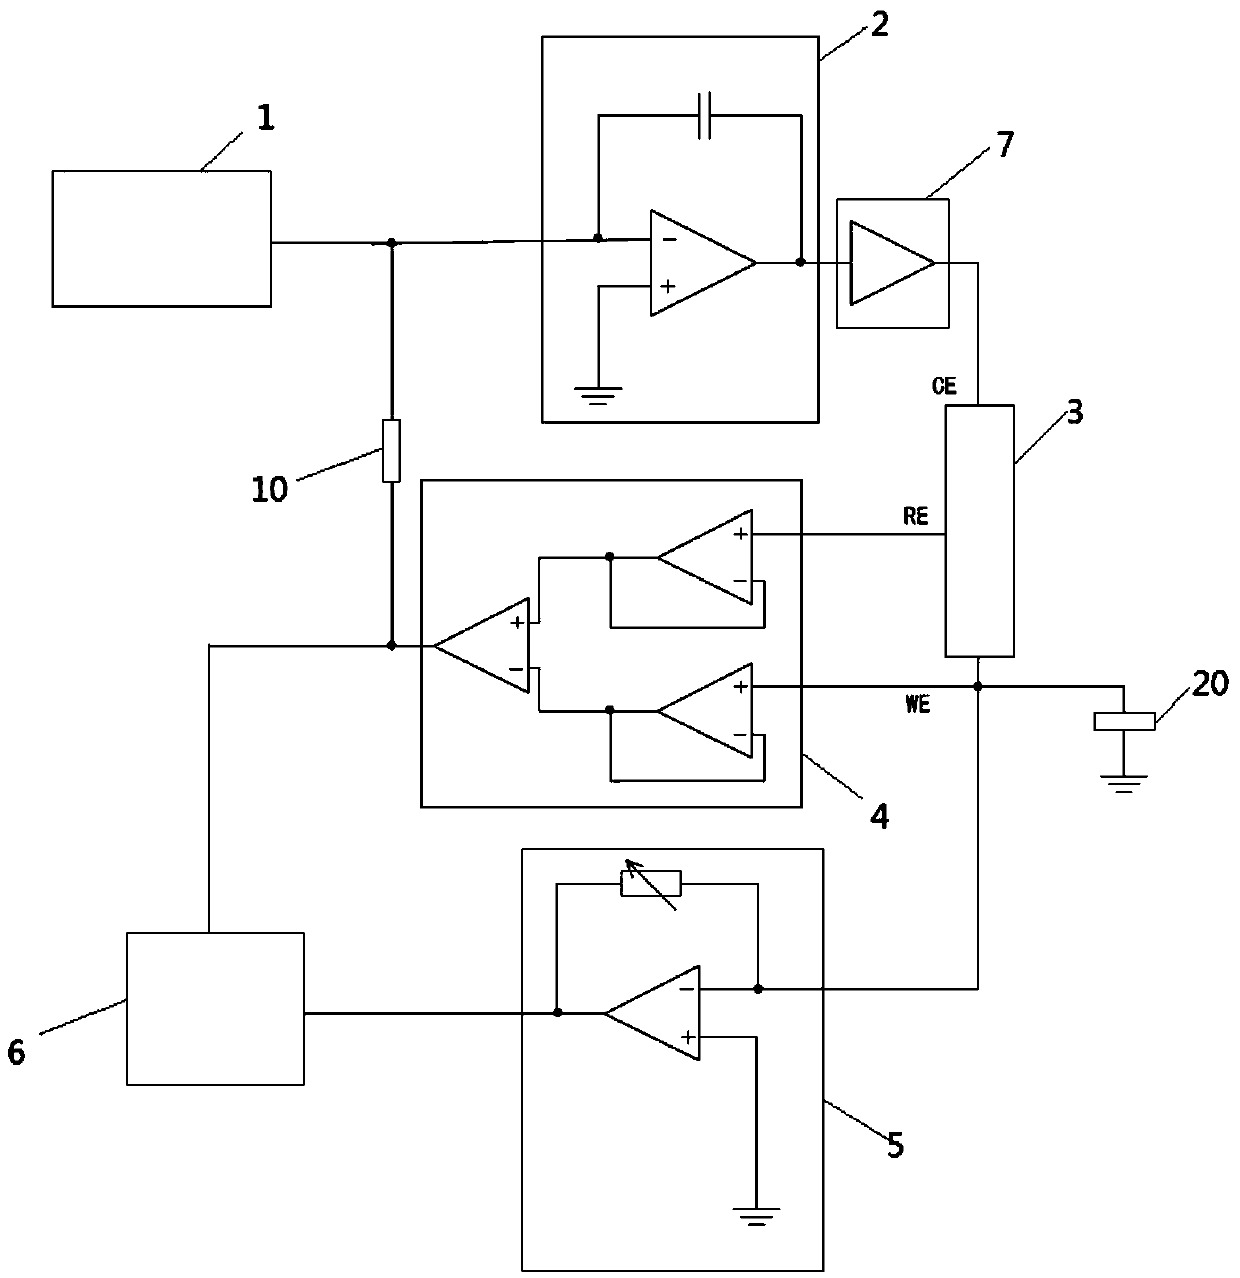 Measurement and analysis device applicable to electrochemical systems with different impedances